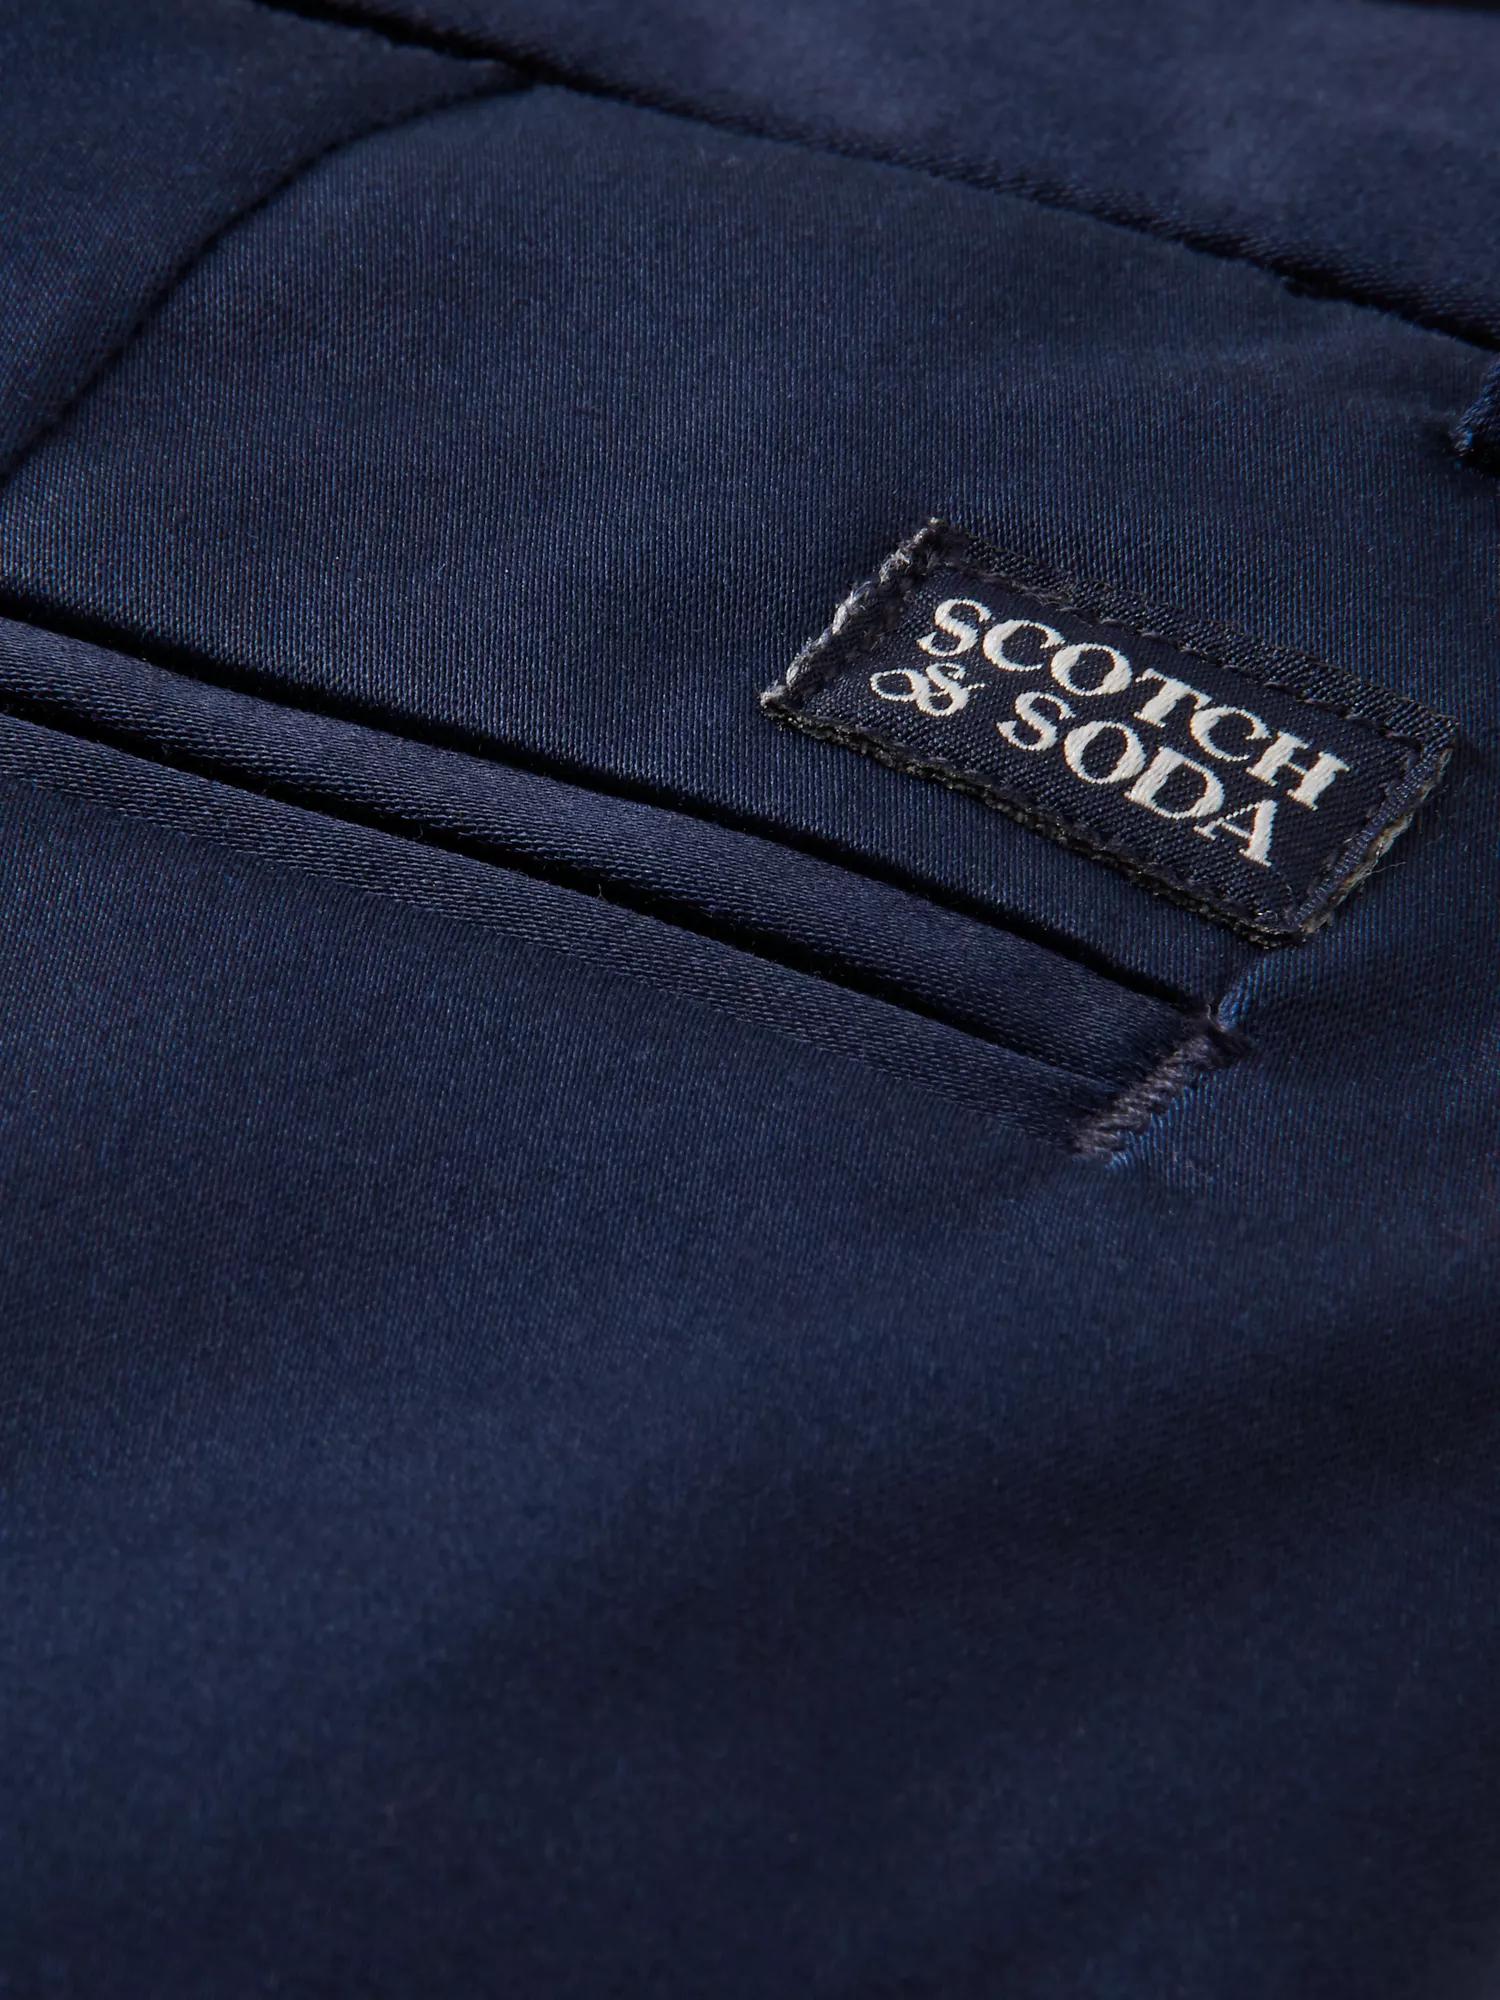 Scotch & Soda Loose fit classic dress trousers - Outlet DTL6